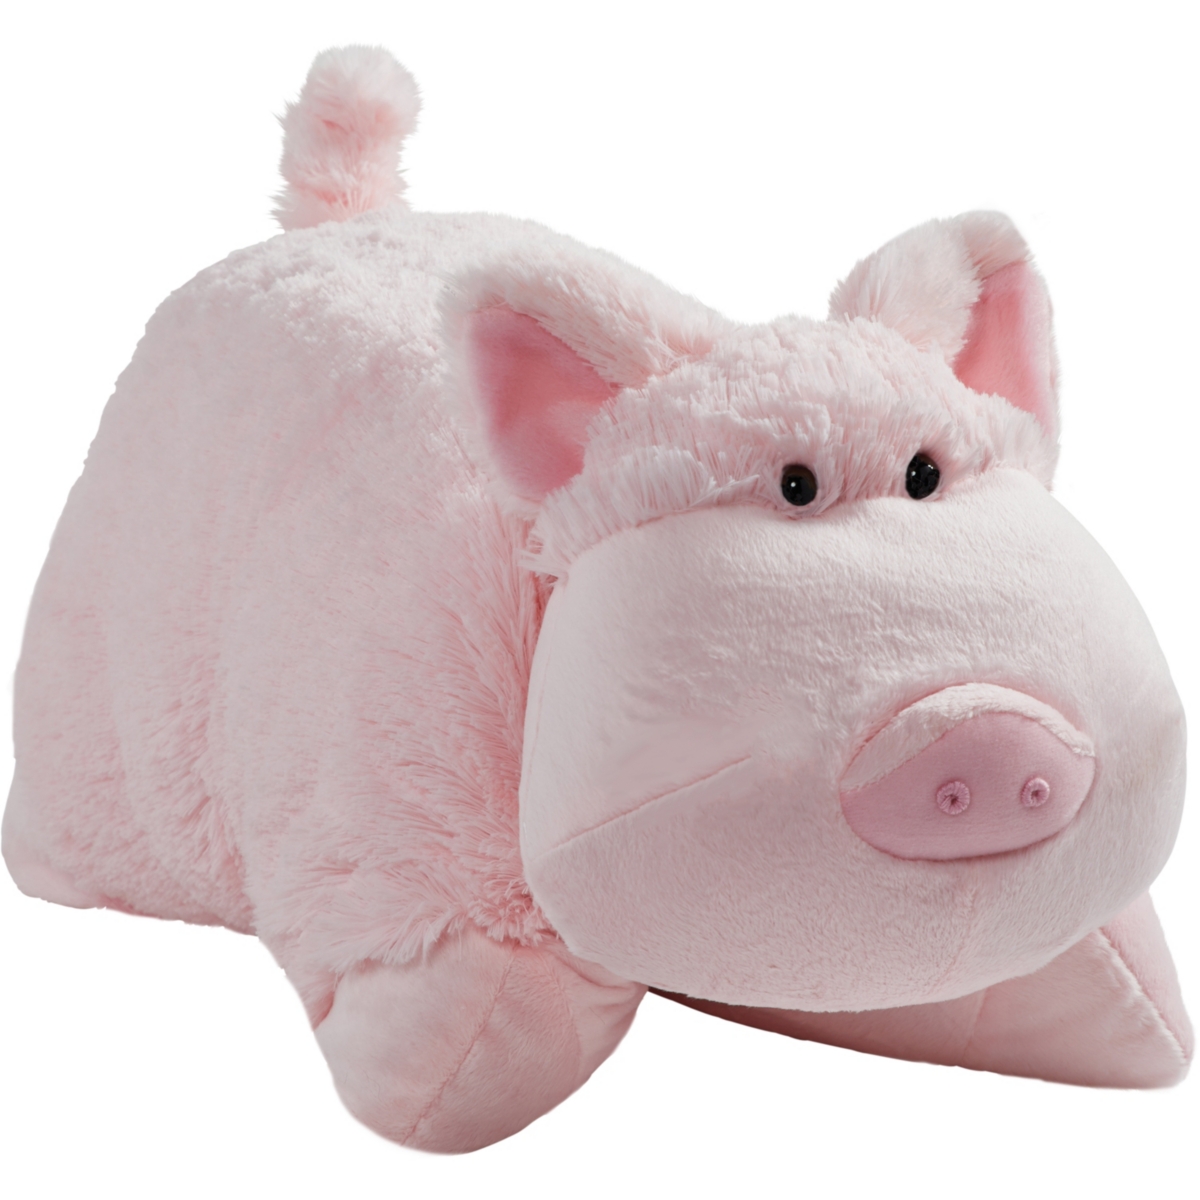 Pillow Pets Kids' Signature Wiggly Pig Stuffed Animal Plush Toy In Pink